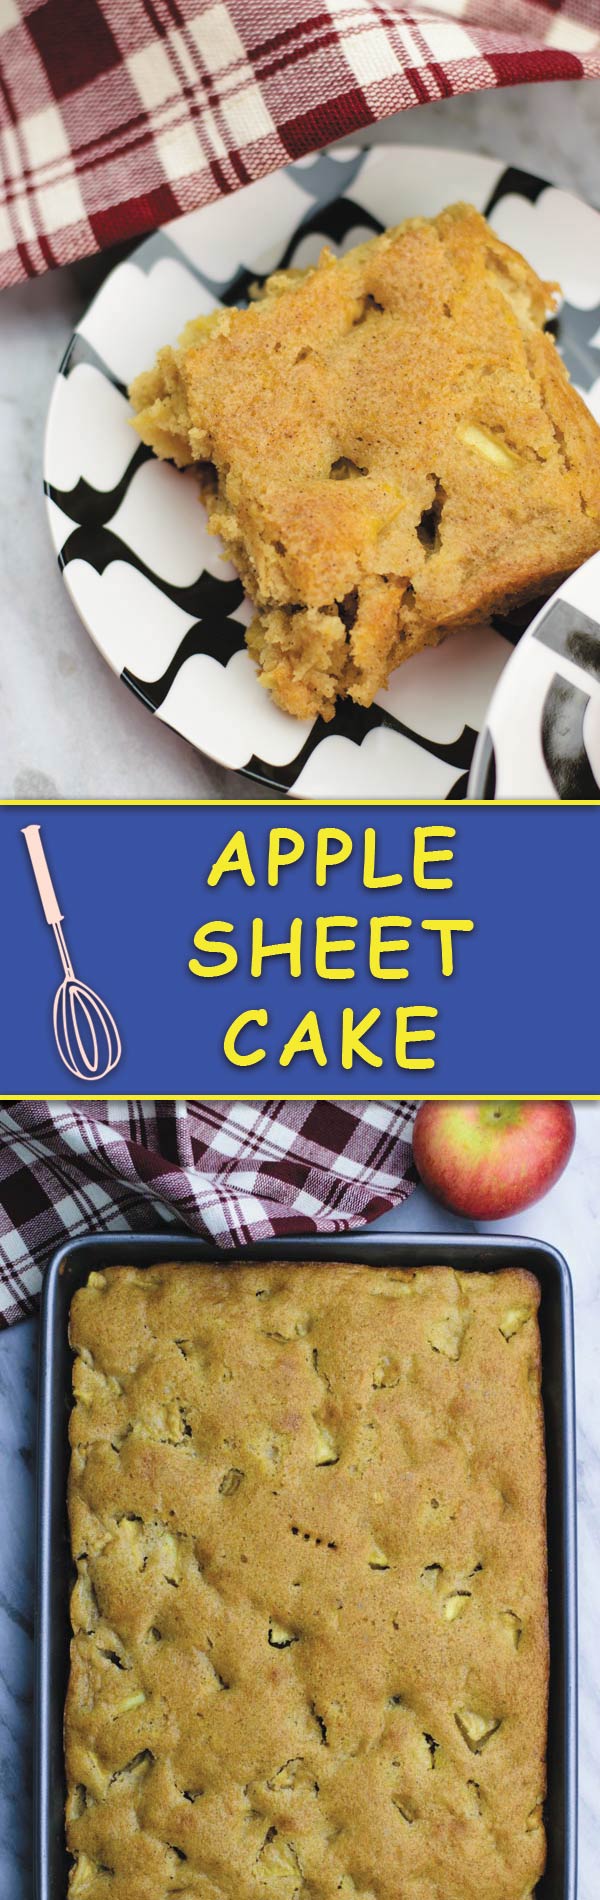 Apple Sheet Cake - easy sheet cake filled with fresh apples and fall spices! A perfect holiday treat.